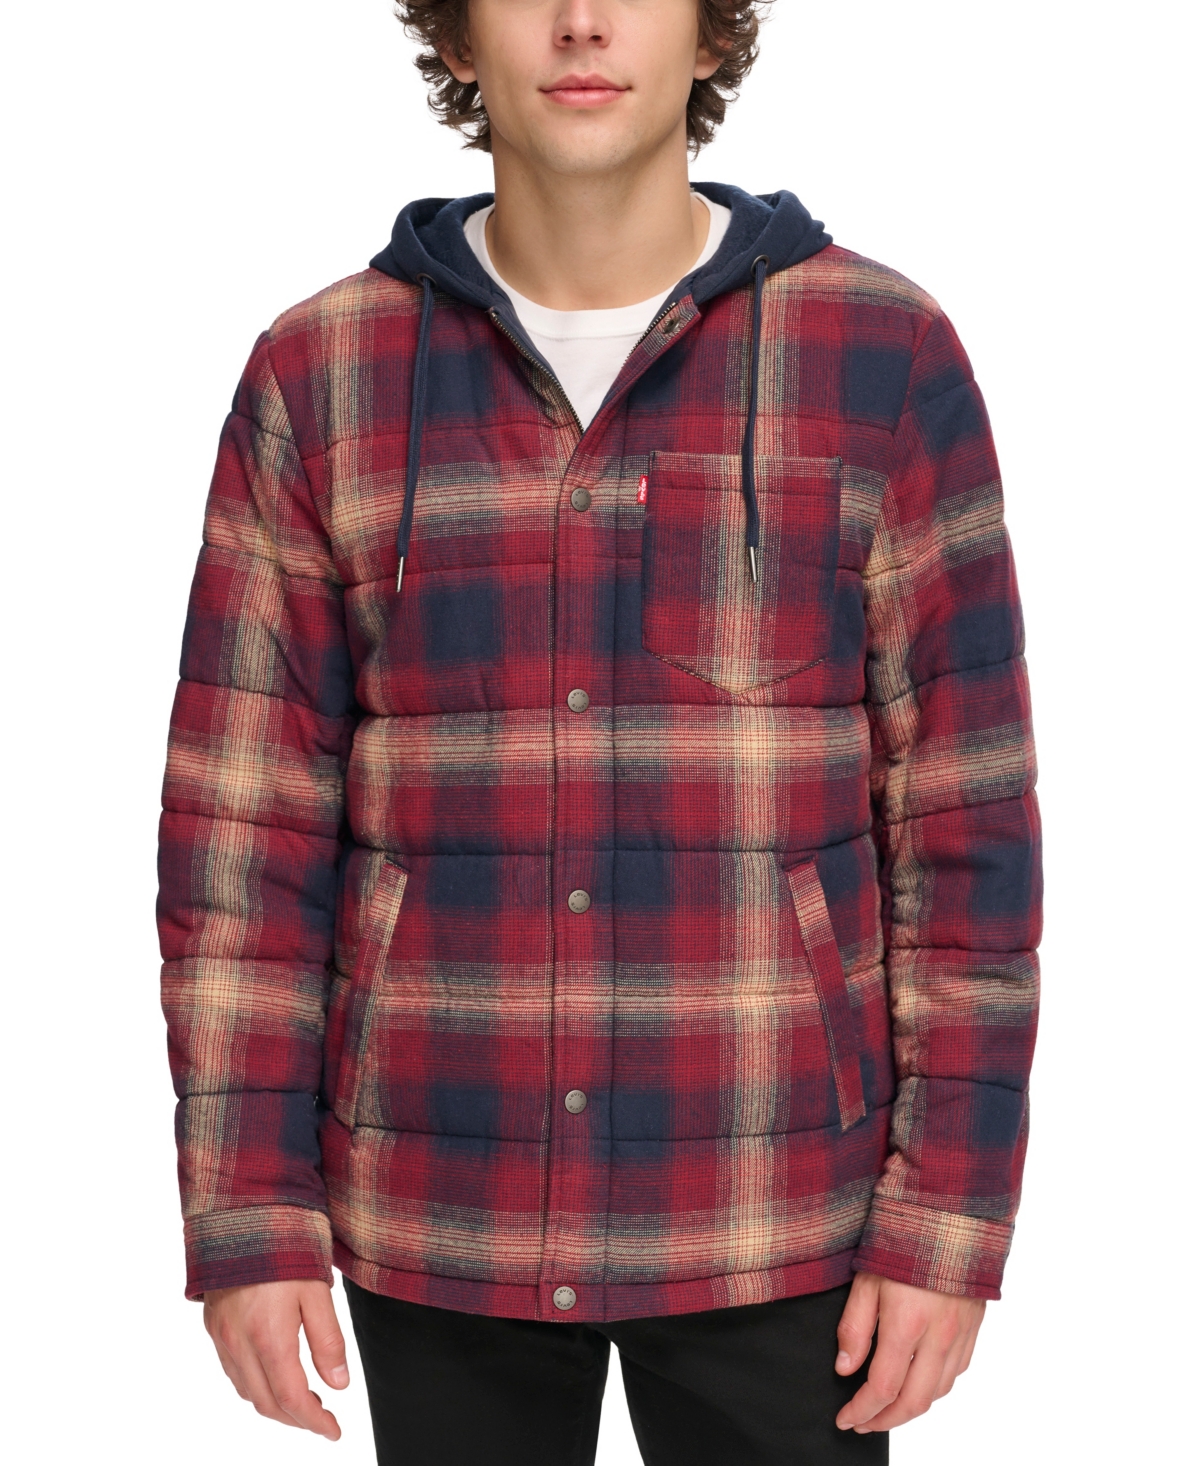 Levi's Men's Cotton Quilted Shirt Jacket With Fleece Hood In Red Ombre Plaid